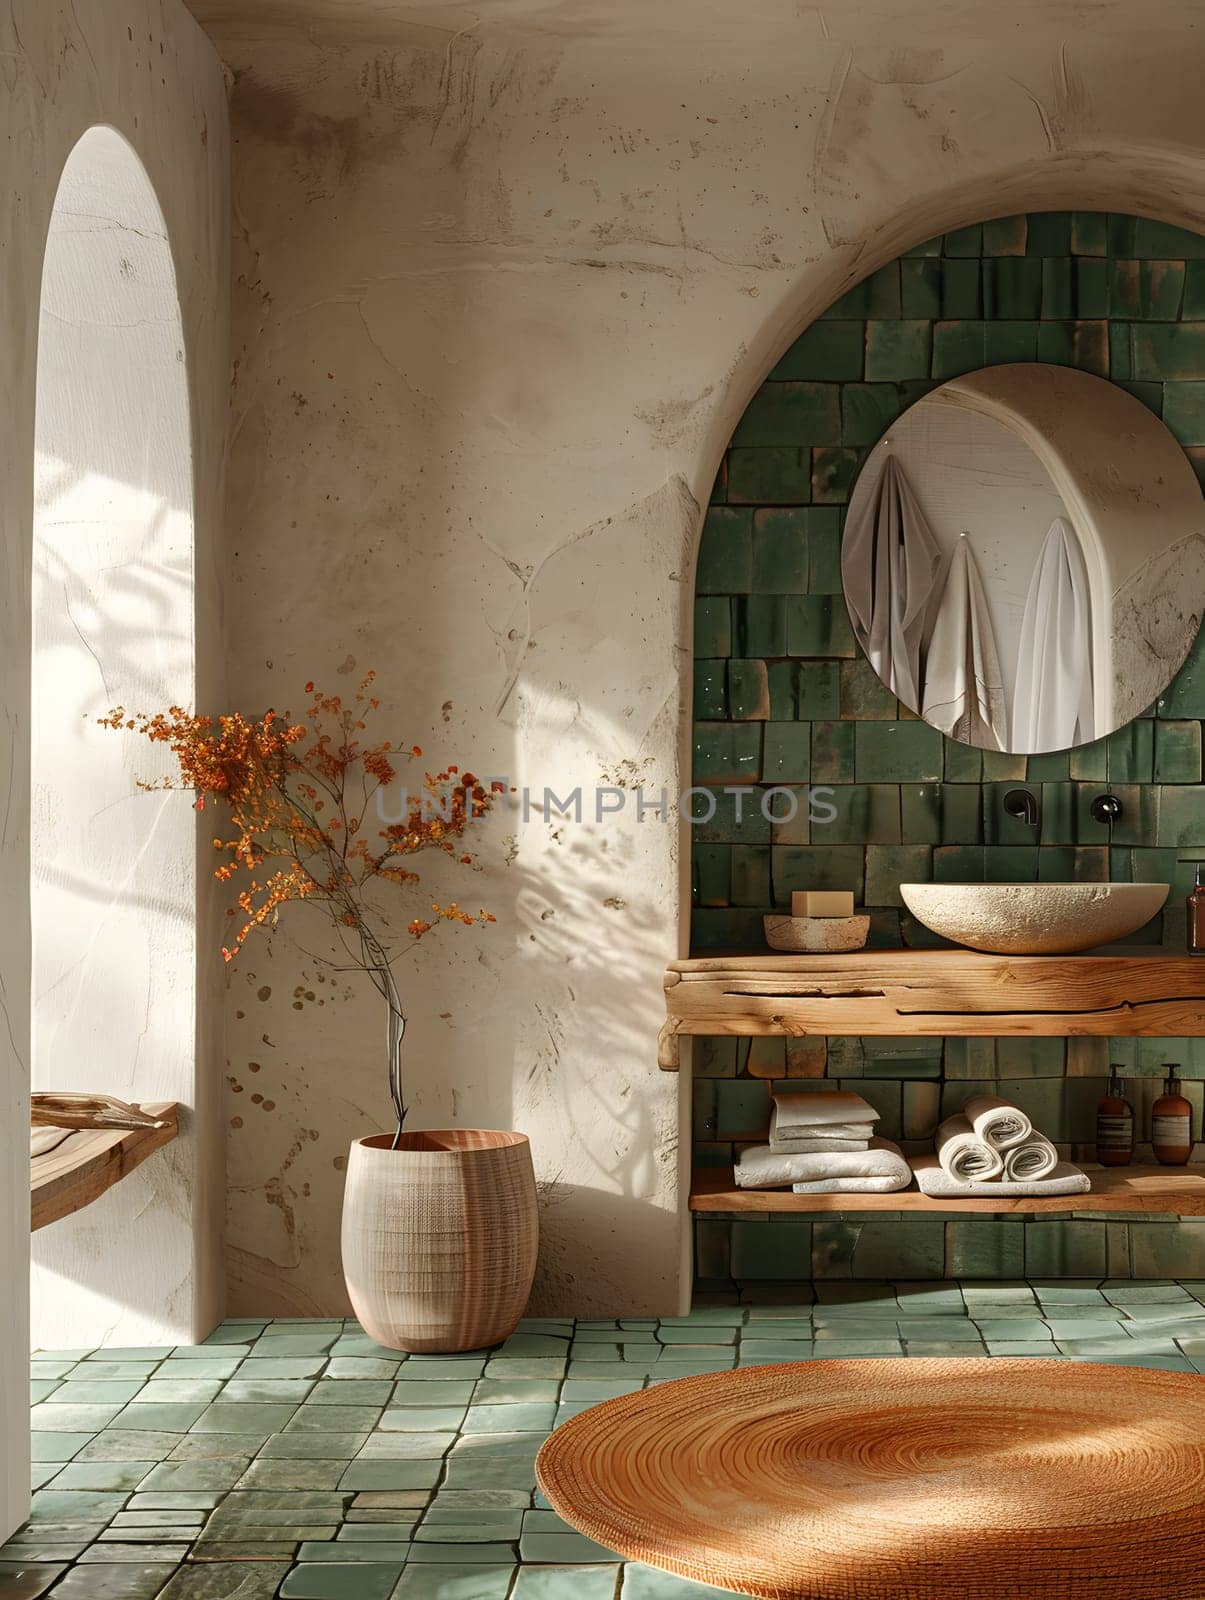 The bathroom features green tiled walls, a sink, and a mirror. The interior design includes wood flooring, brickwork, and a ceiling